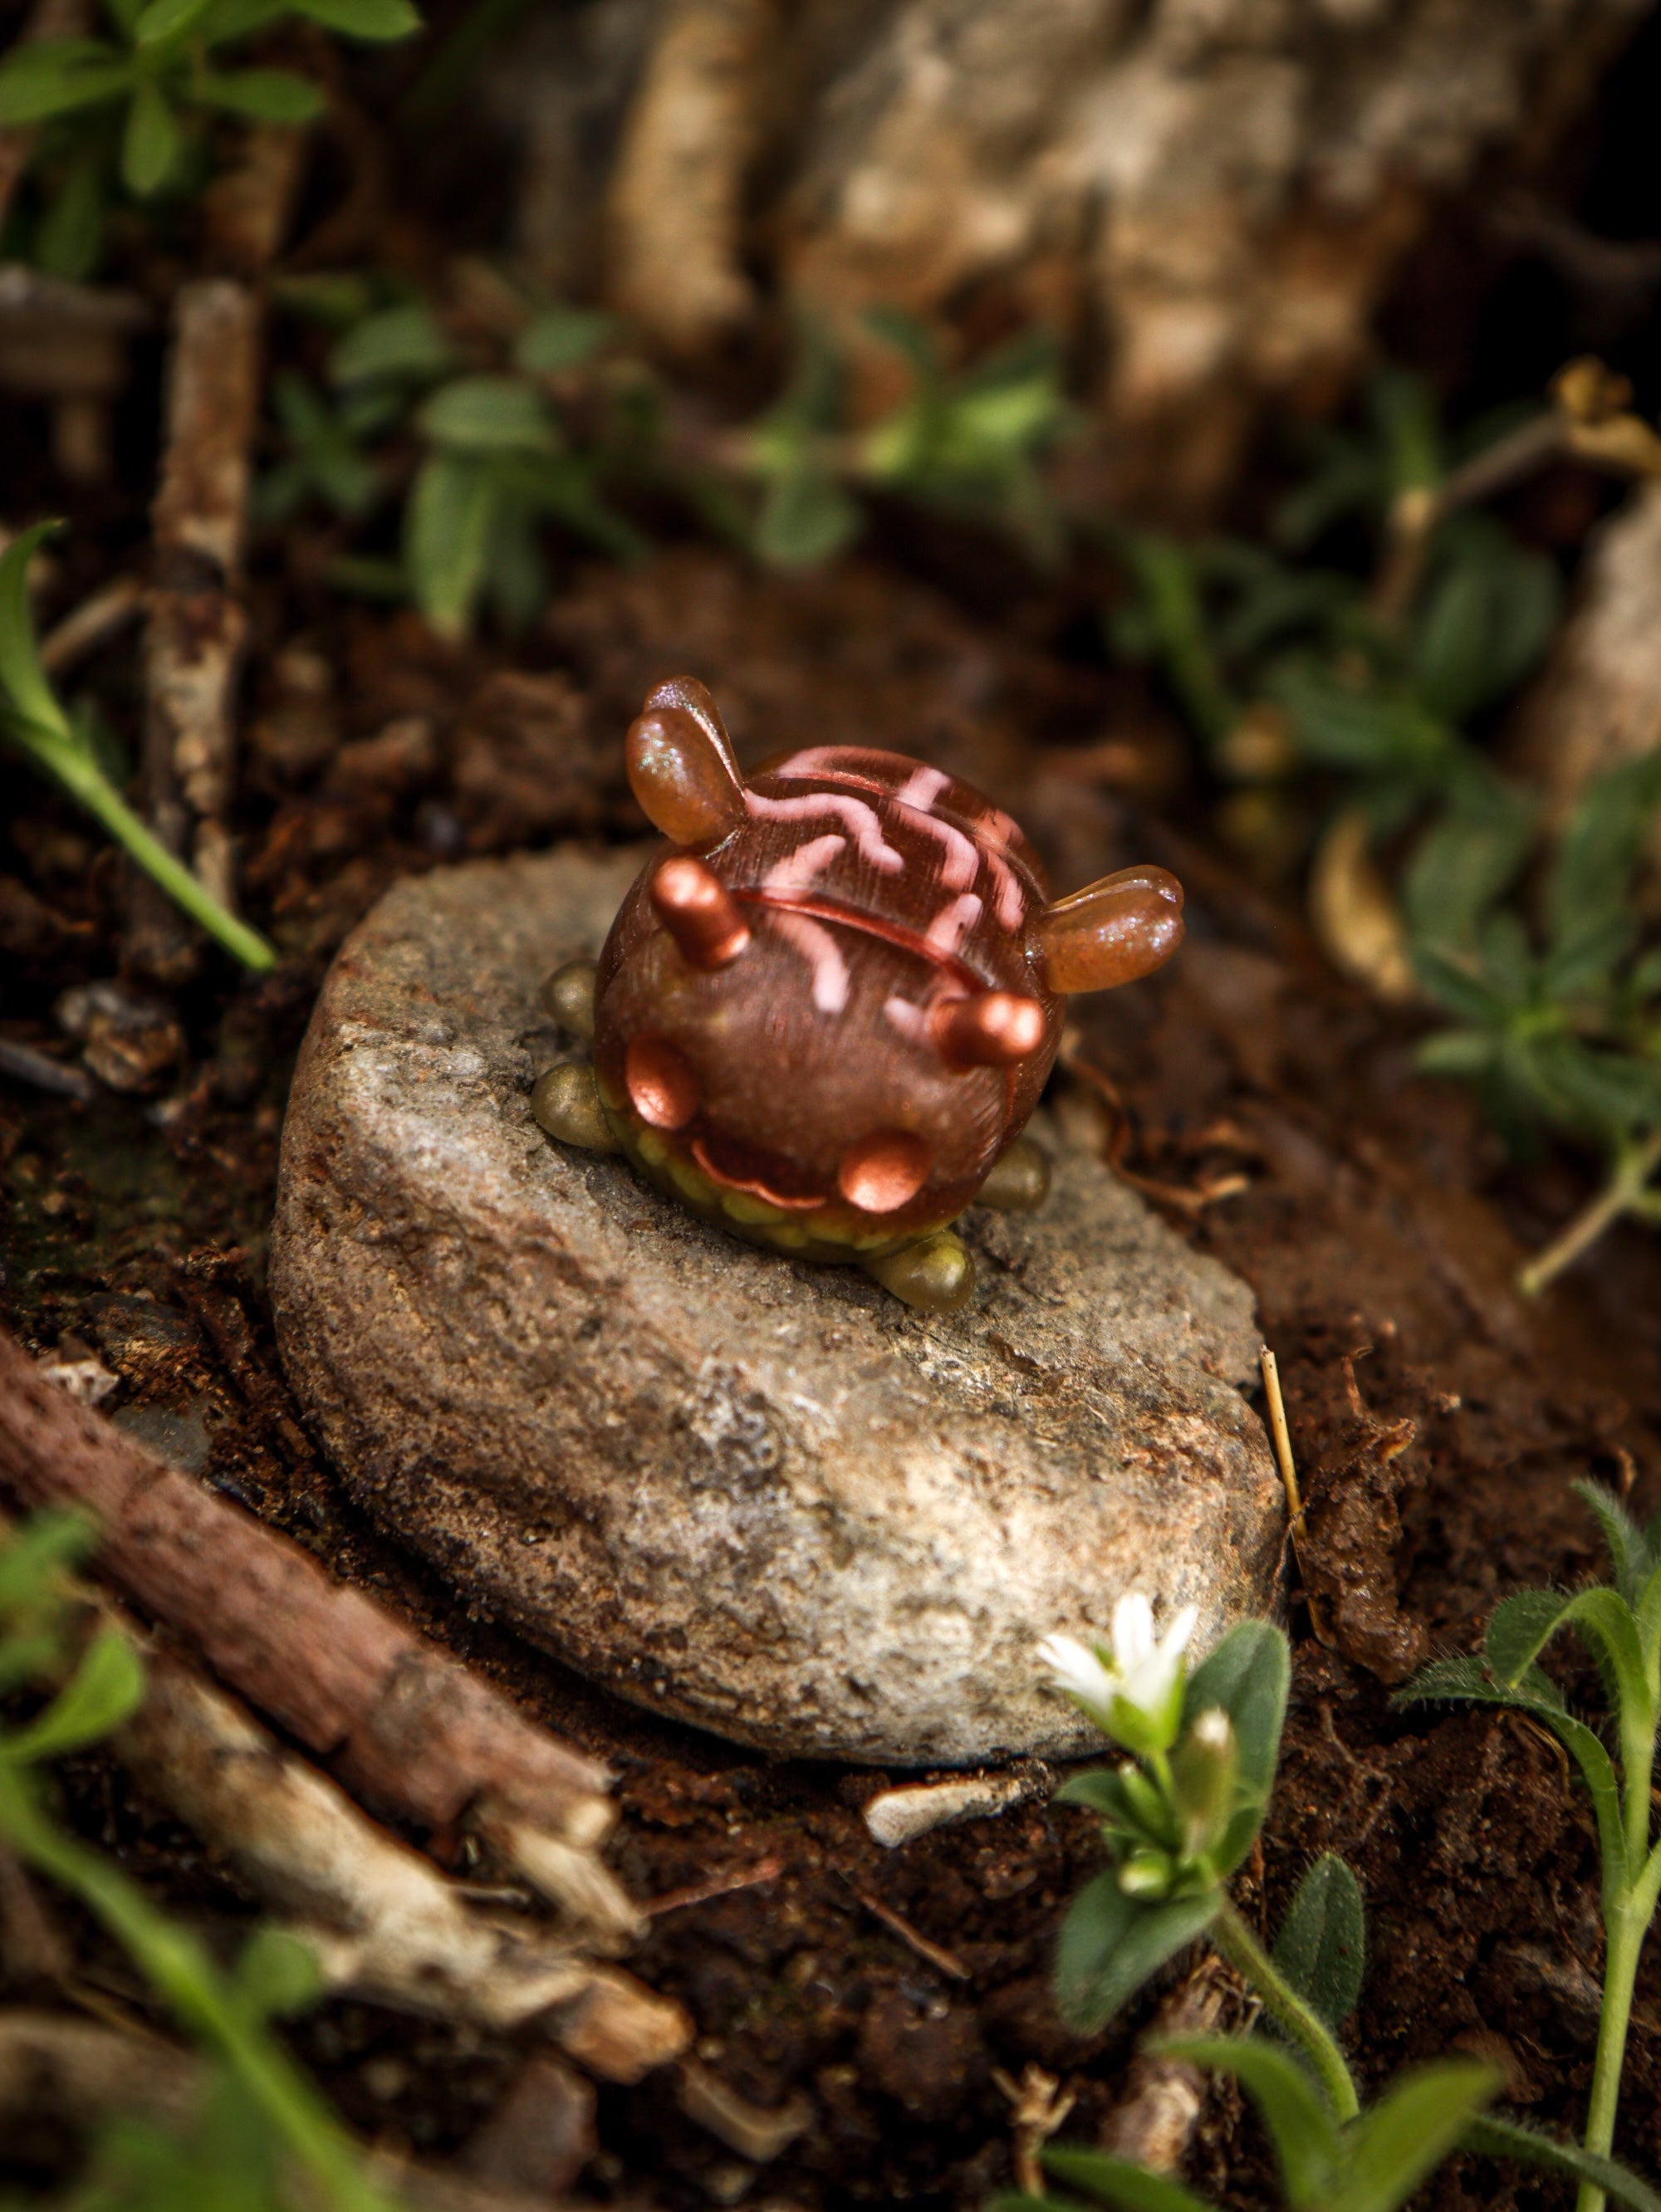 A whimsical toy bug on a rock, part of the Octopus Cube collection by Fairies And Fancies at Strangecat Toys. Made of Polymer Clay and Resin, approximately 1 1/2 inches tall.